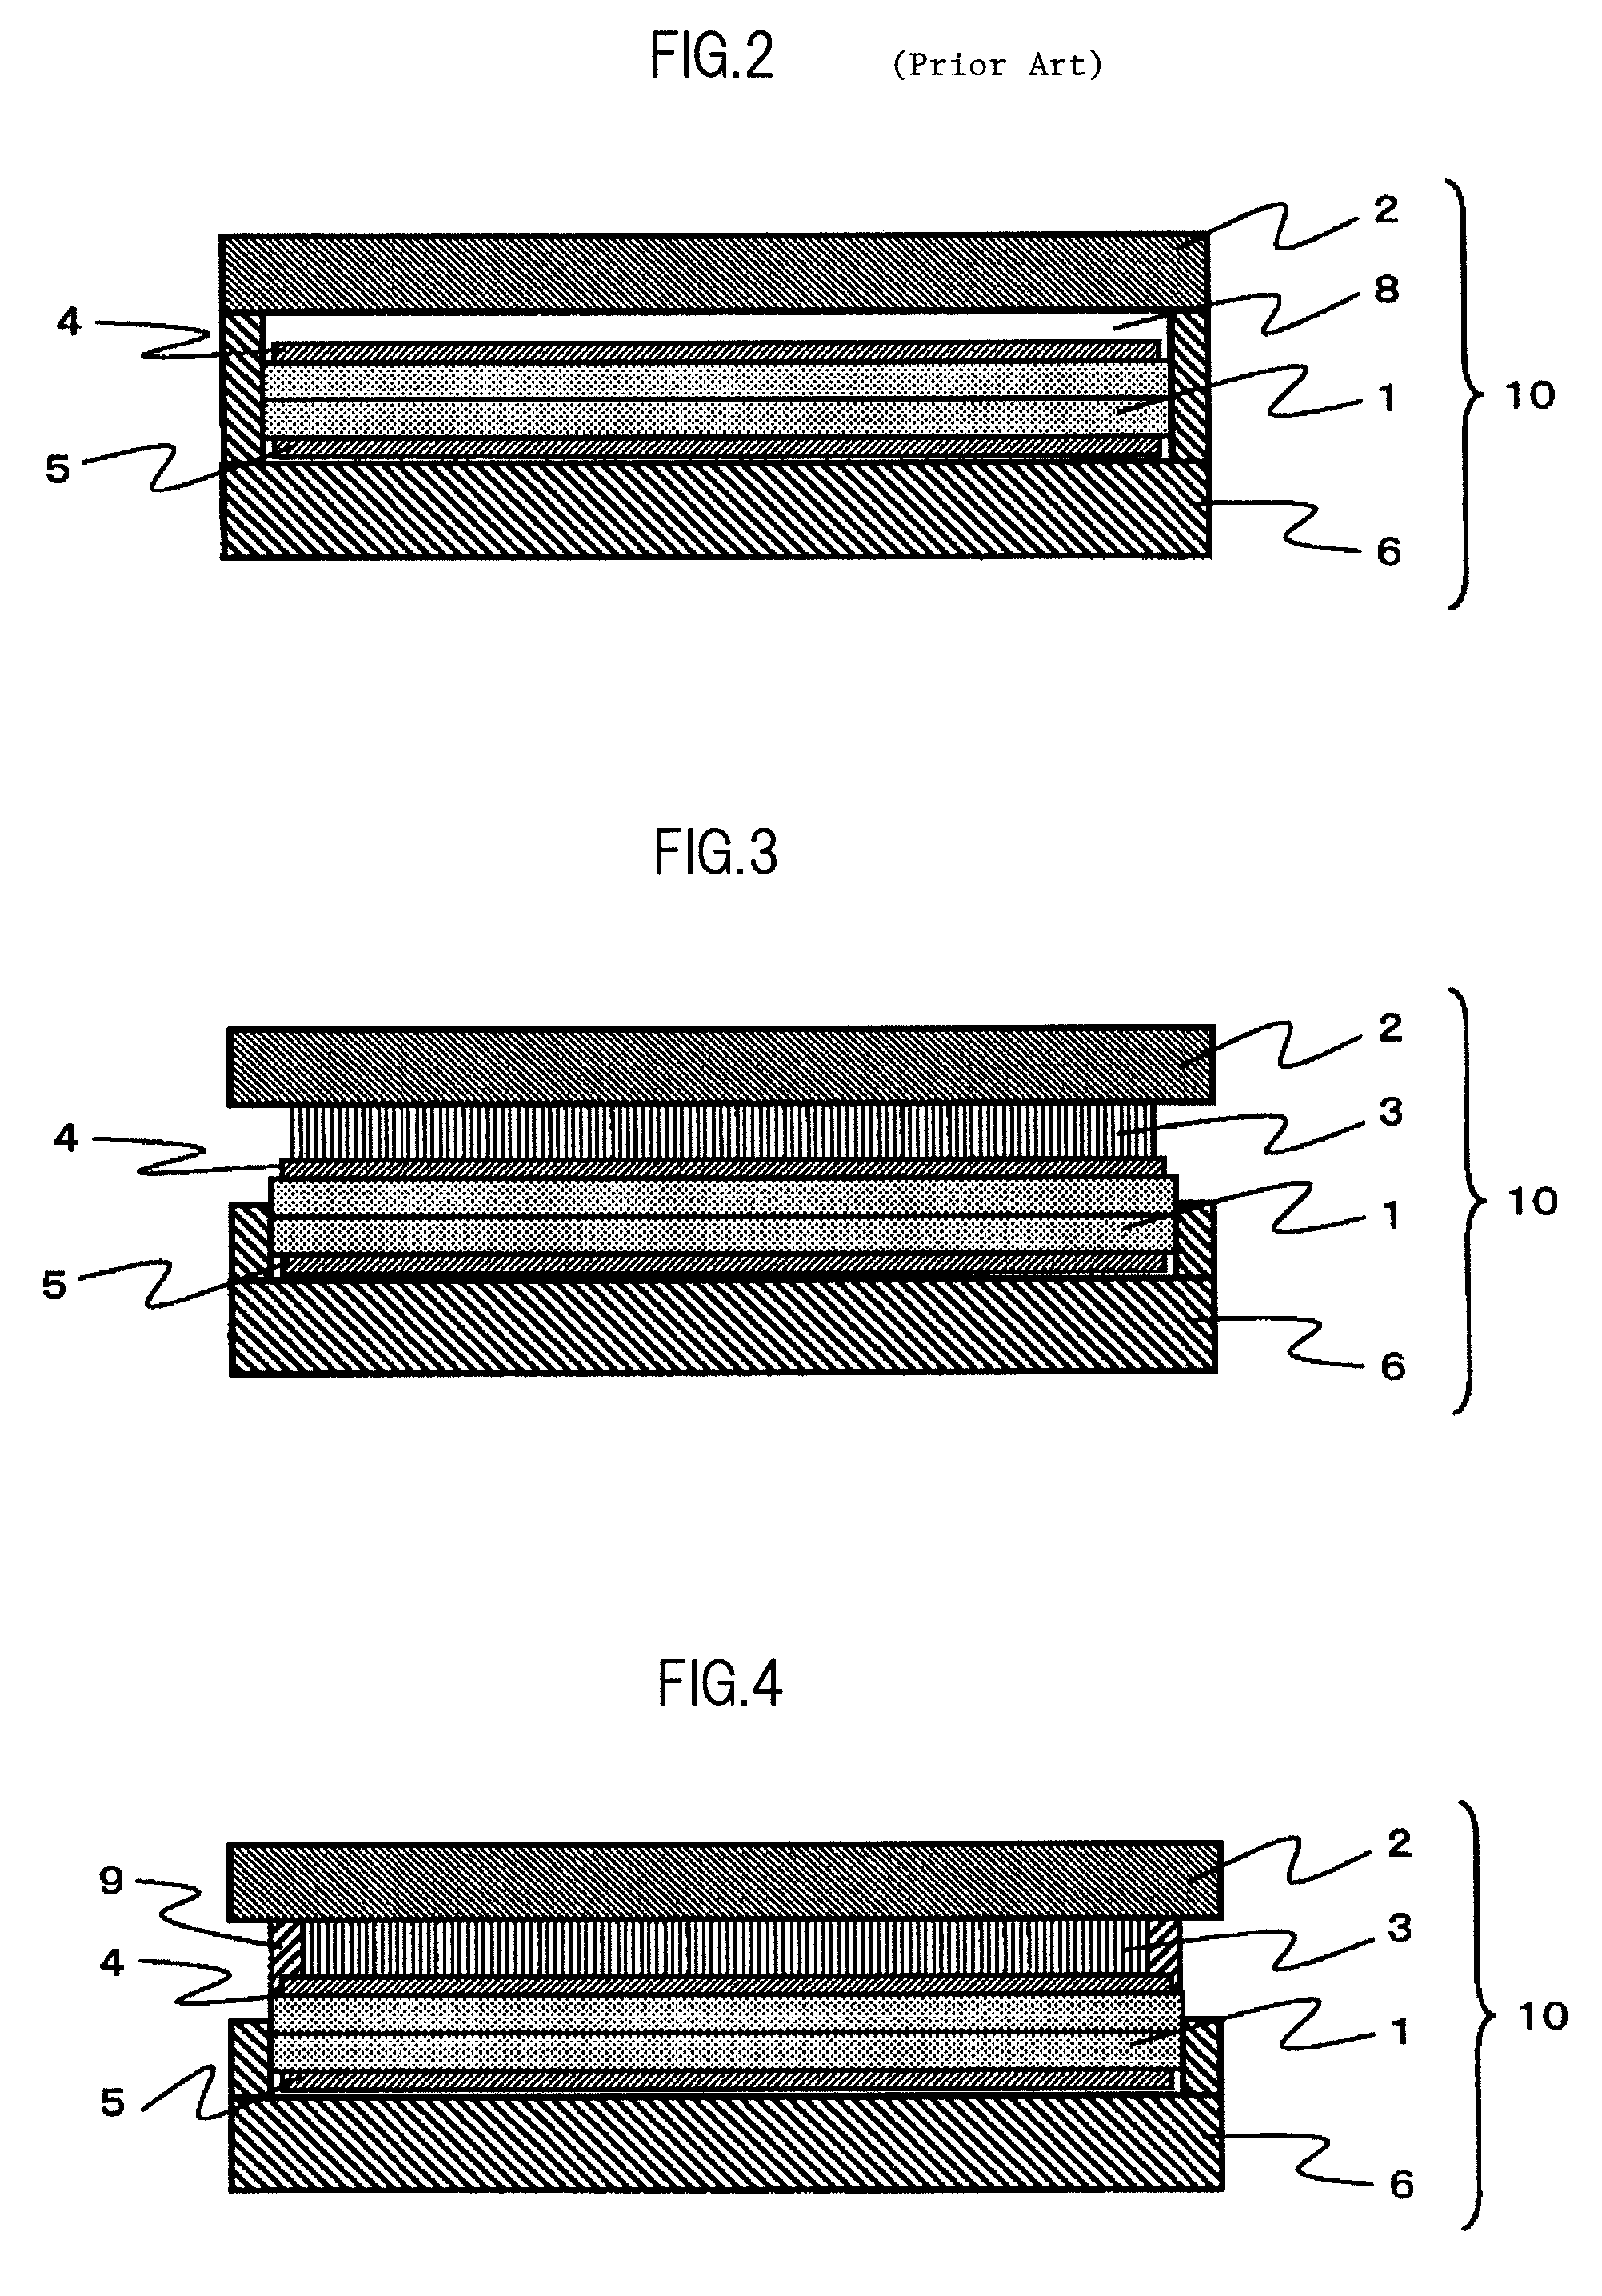 Method of manufacturing a display